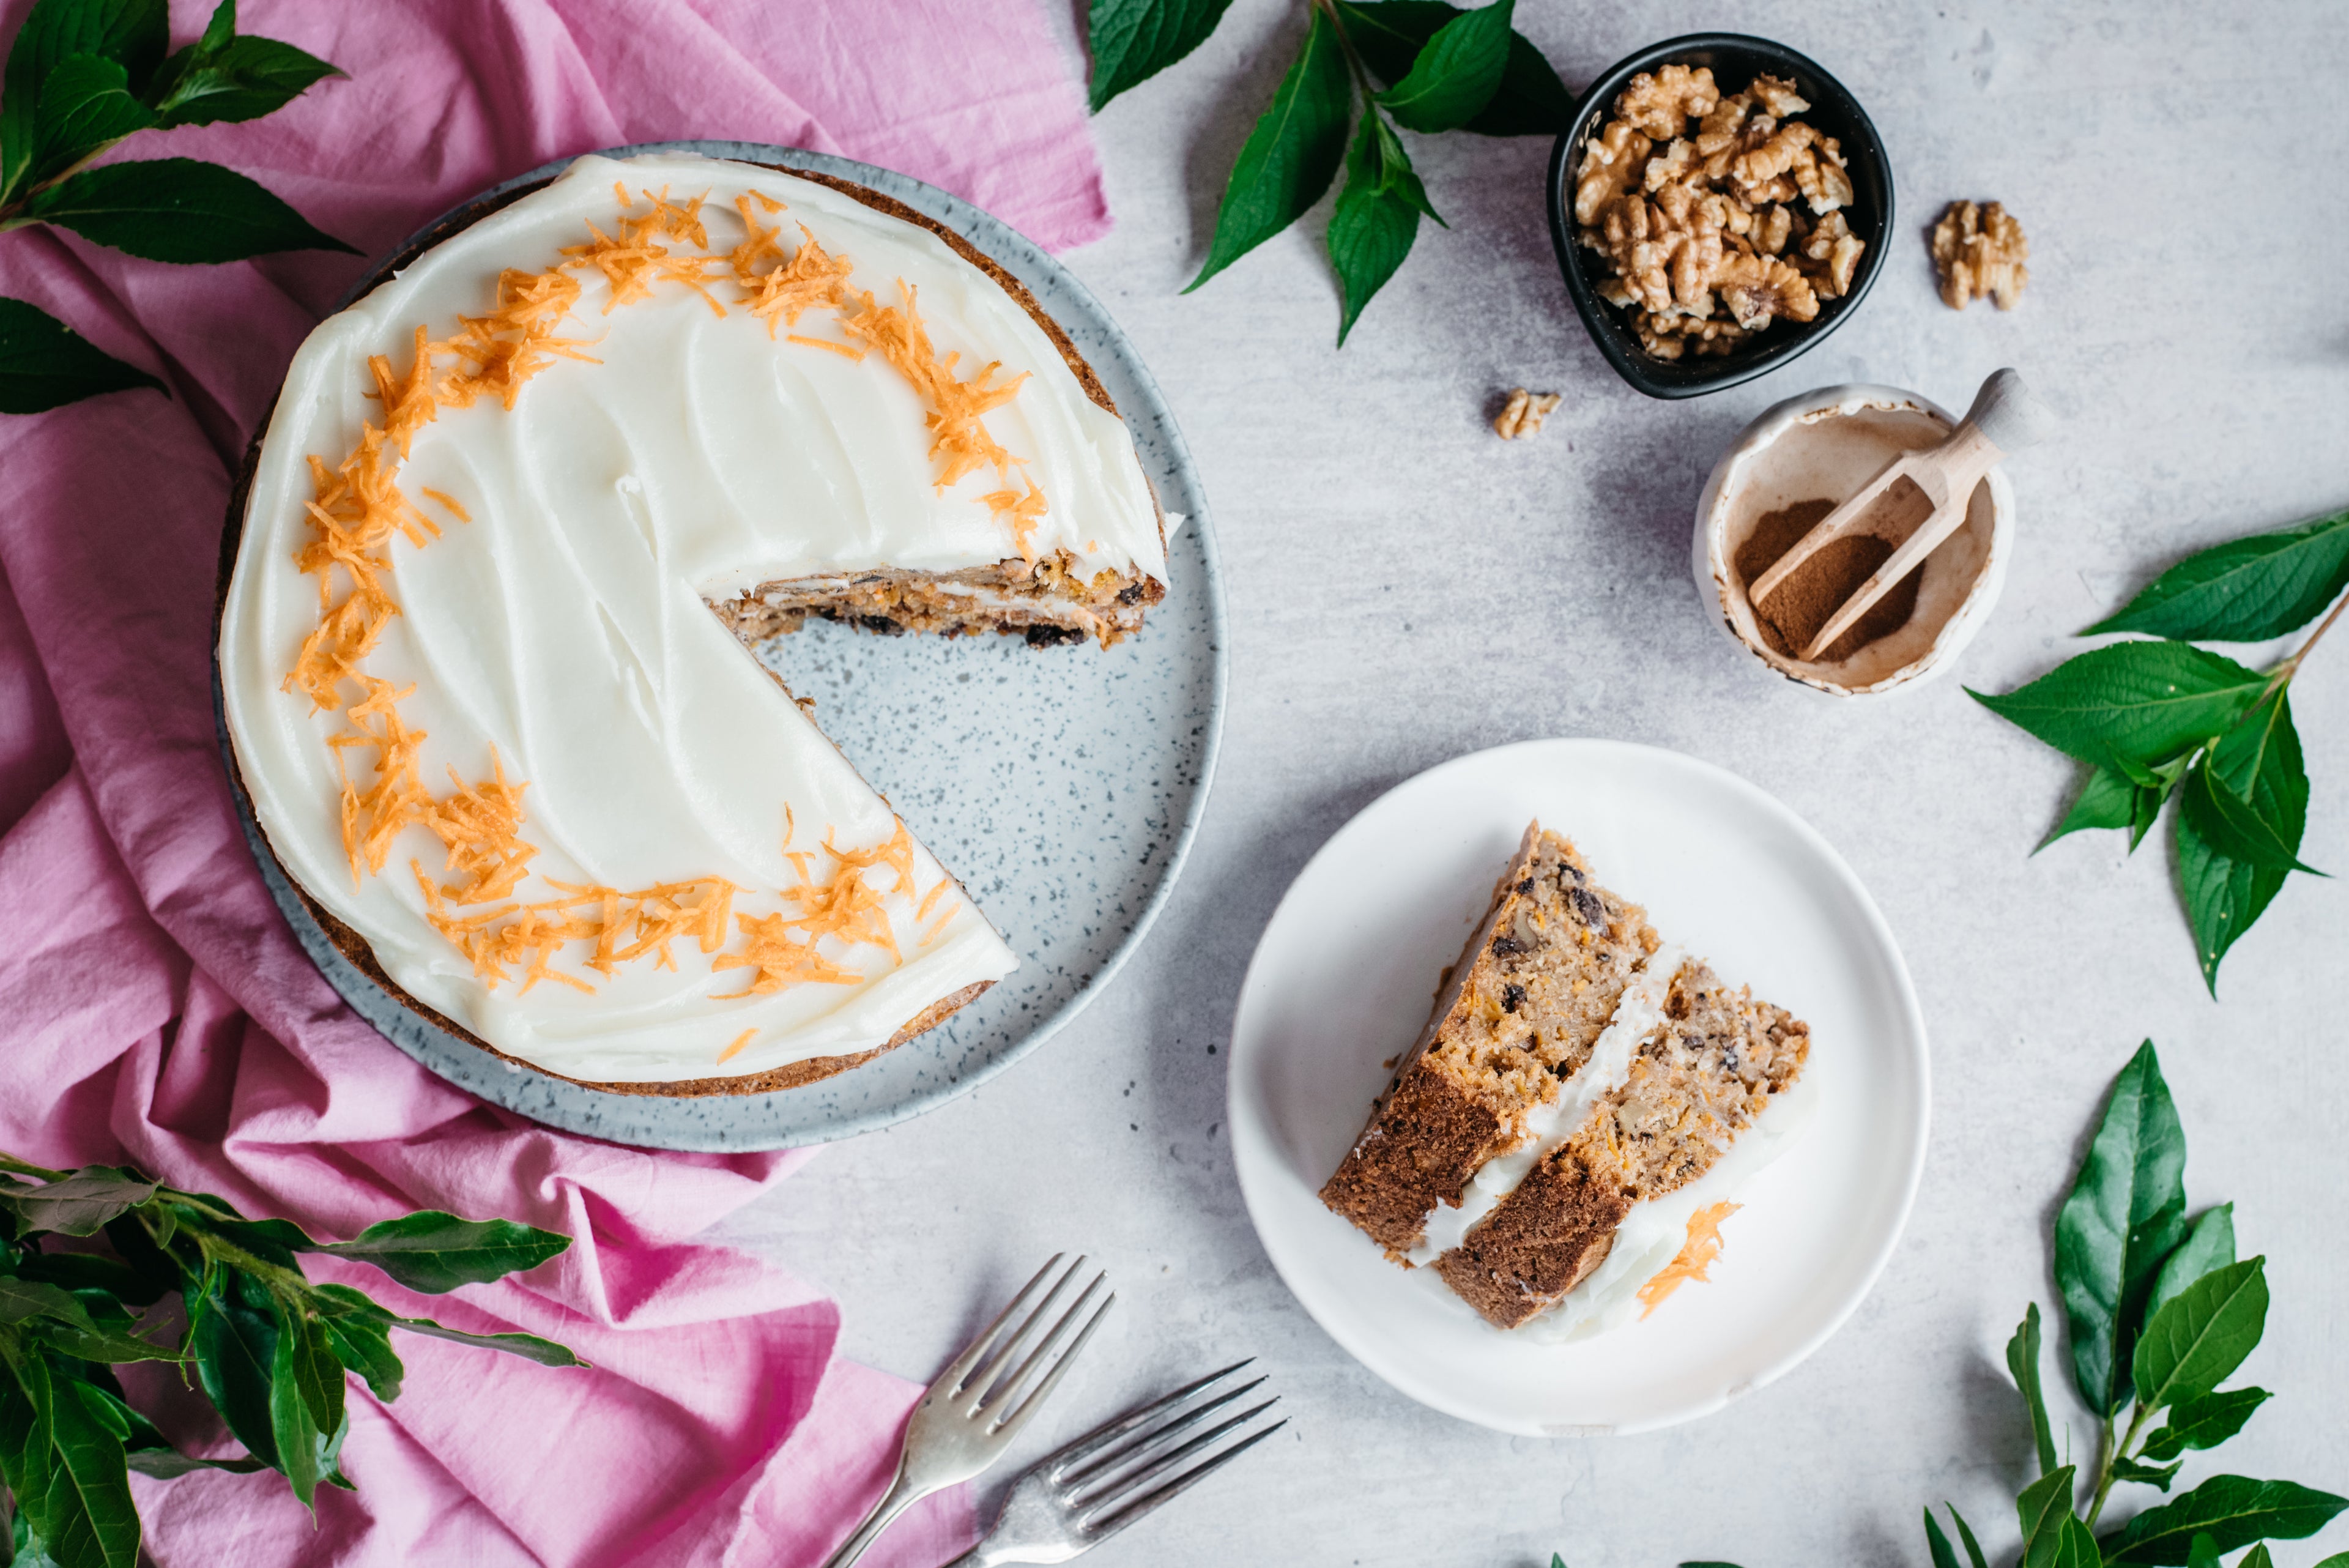 Top down view of a low sugar carrot cake with a slice cut out on a plate next to it